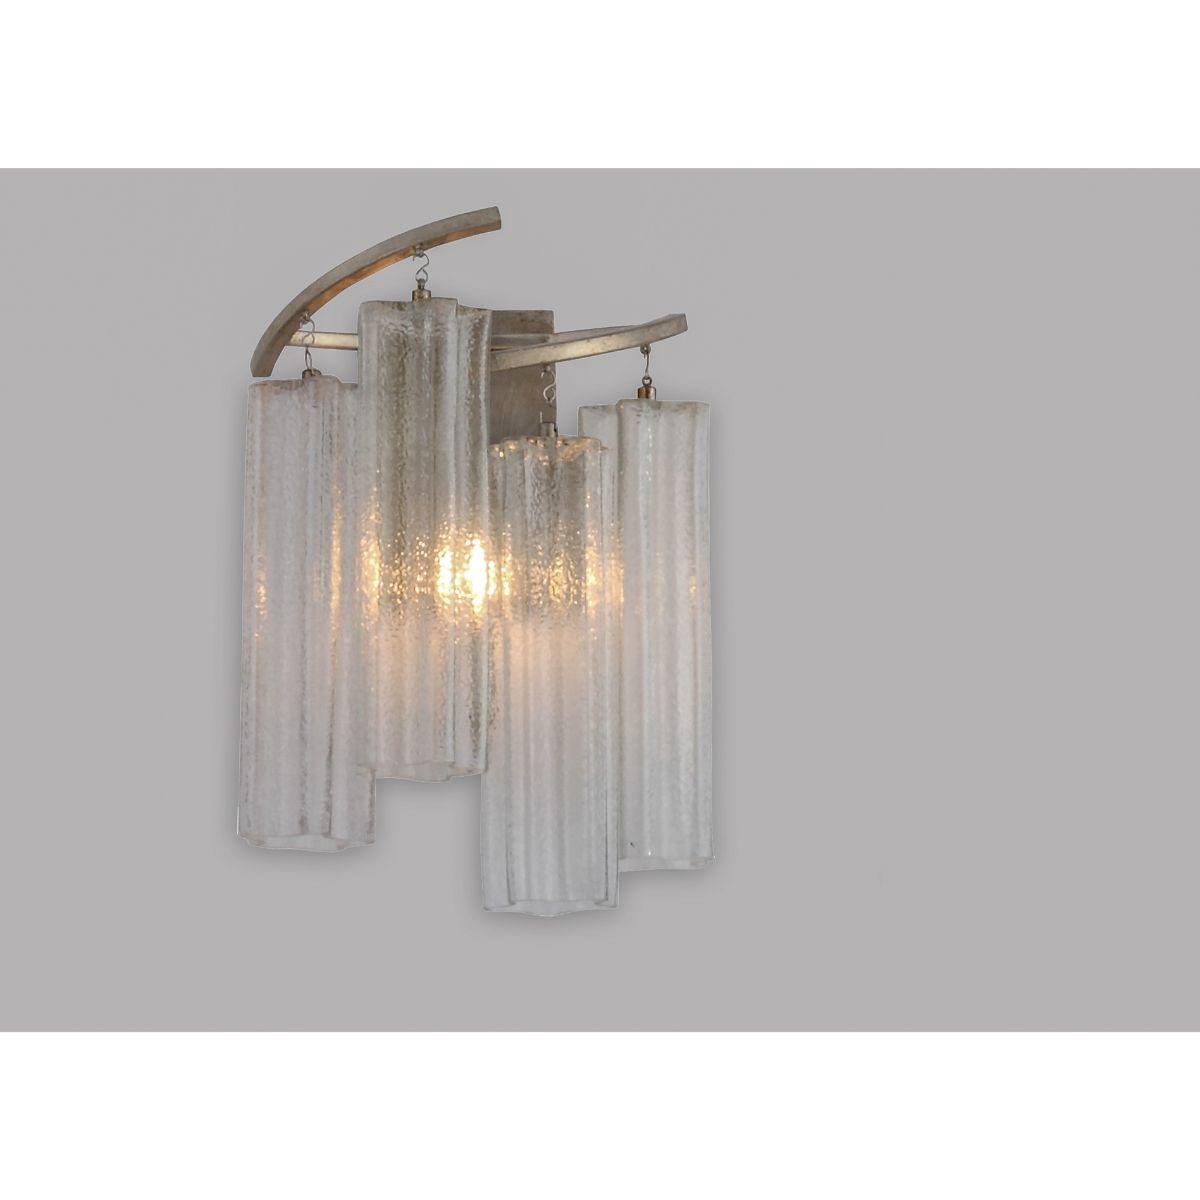 Victoria 13 in. Armed Sconce Gold Finish